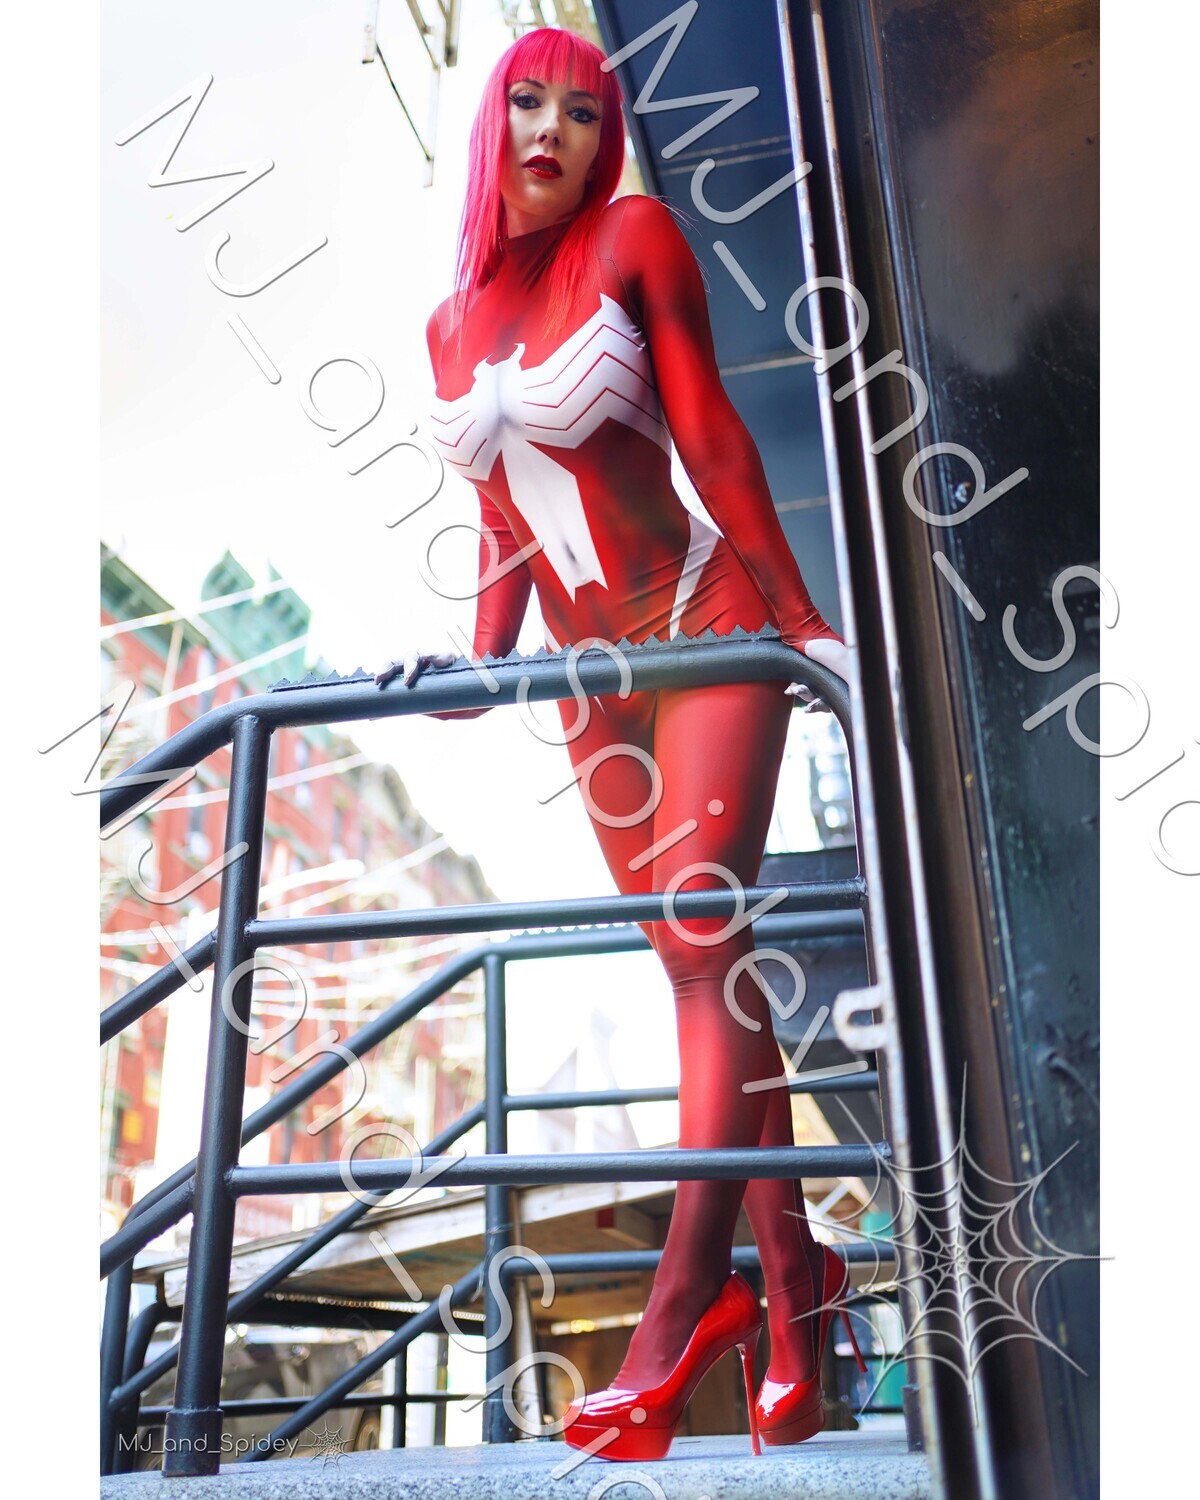 Marvel - Spider-Man - Mary Jane Watson - Ultimate Spider-Woman 3 -  Cosplay Print (@MJ_and_Spidey, MJ and Spidey, Comics)